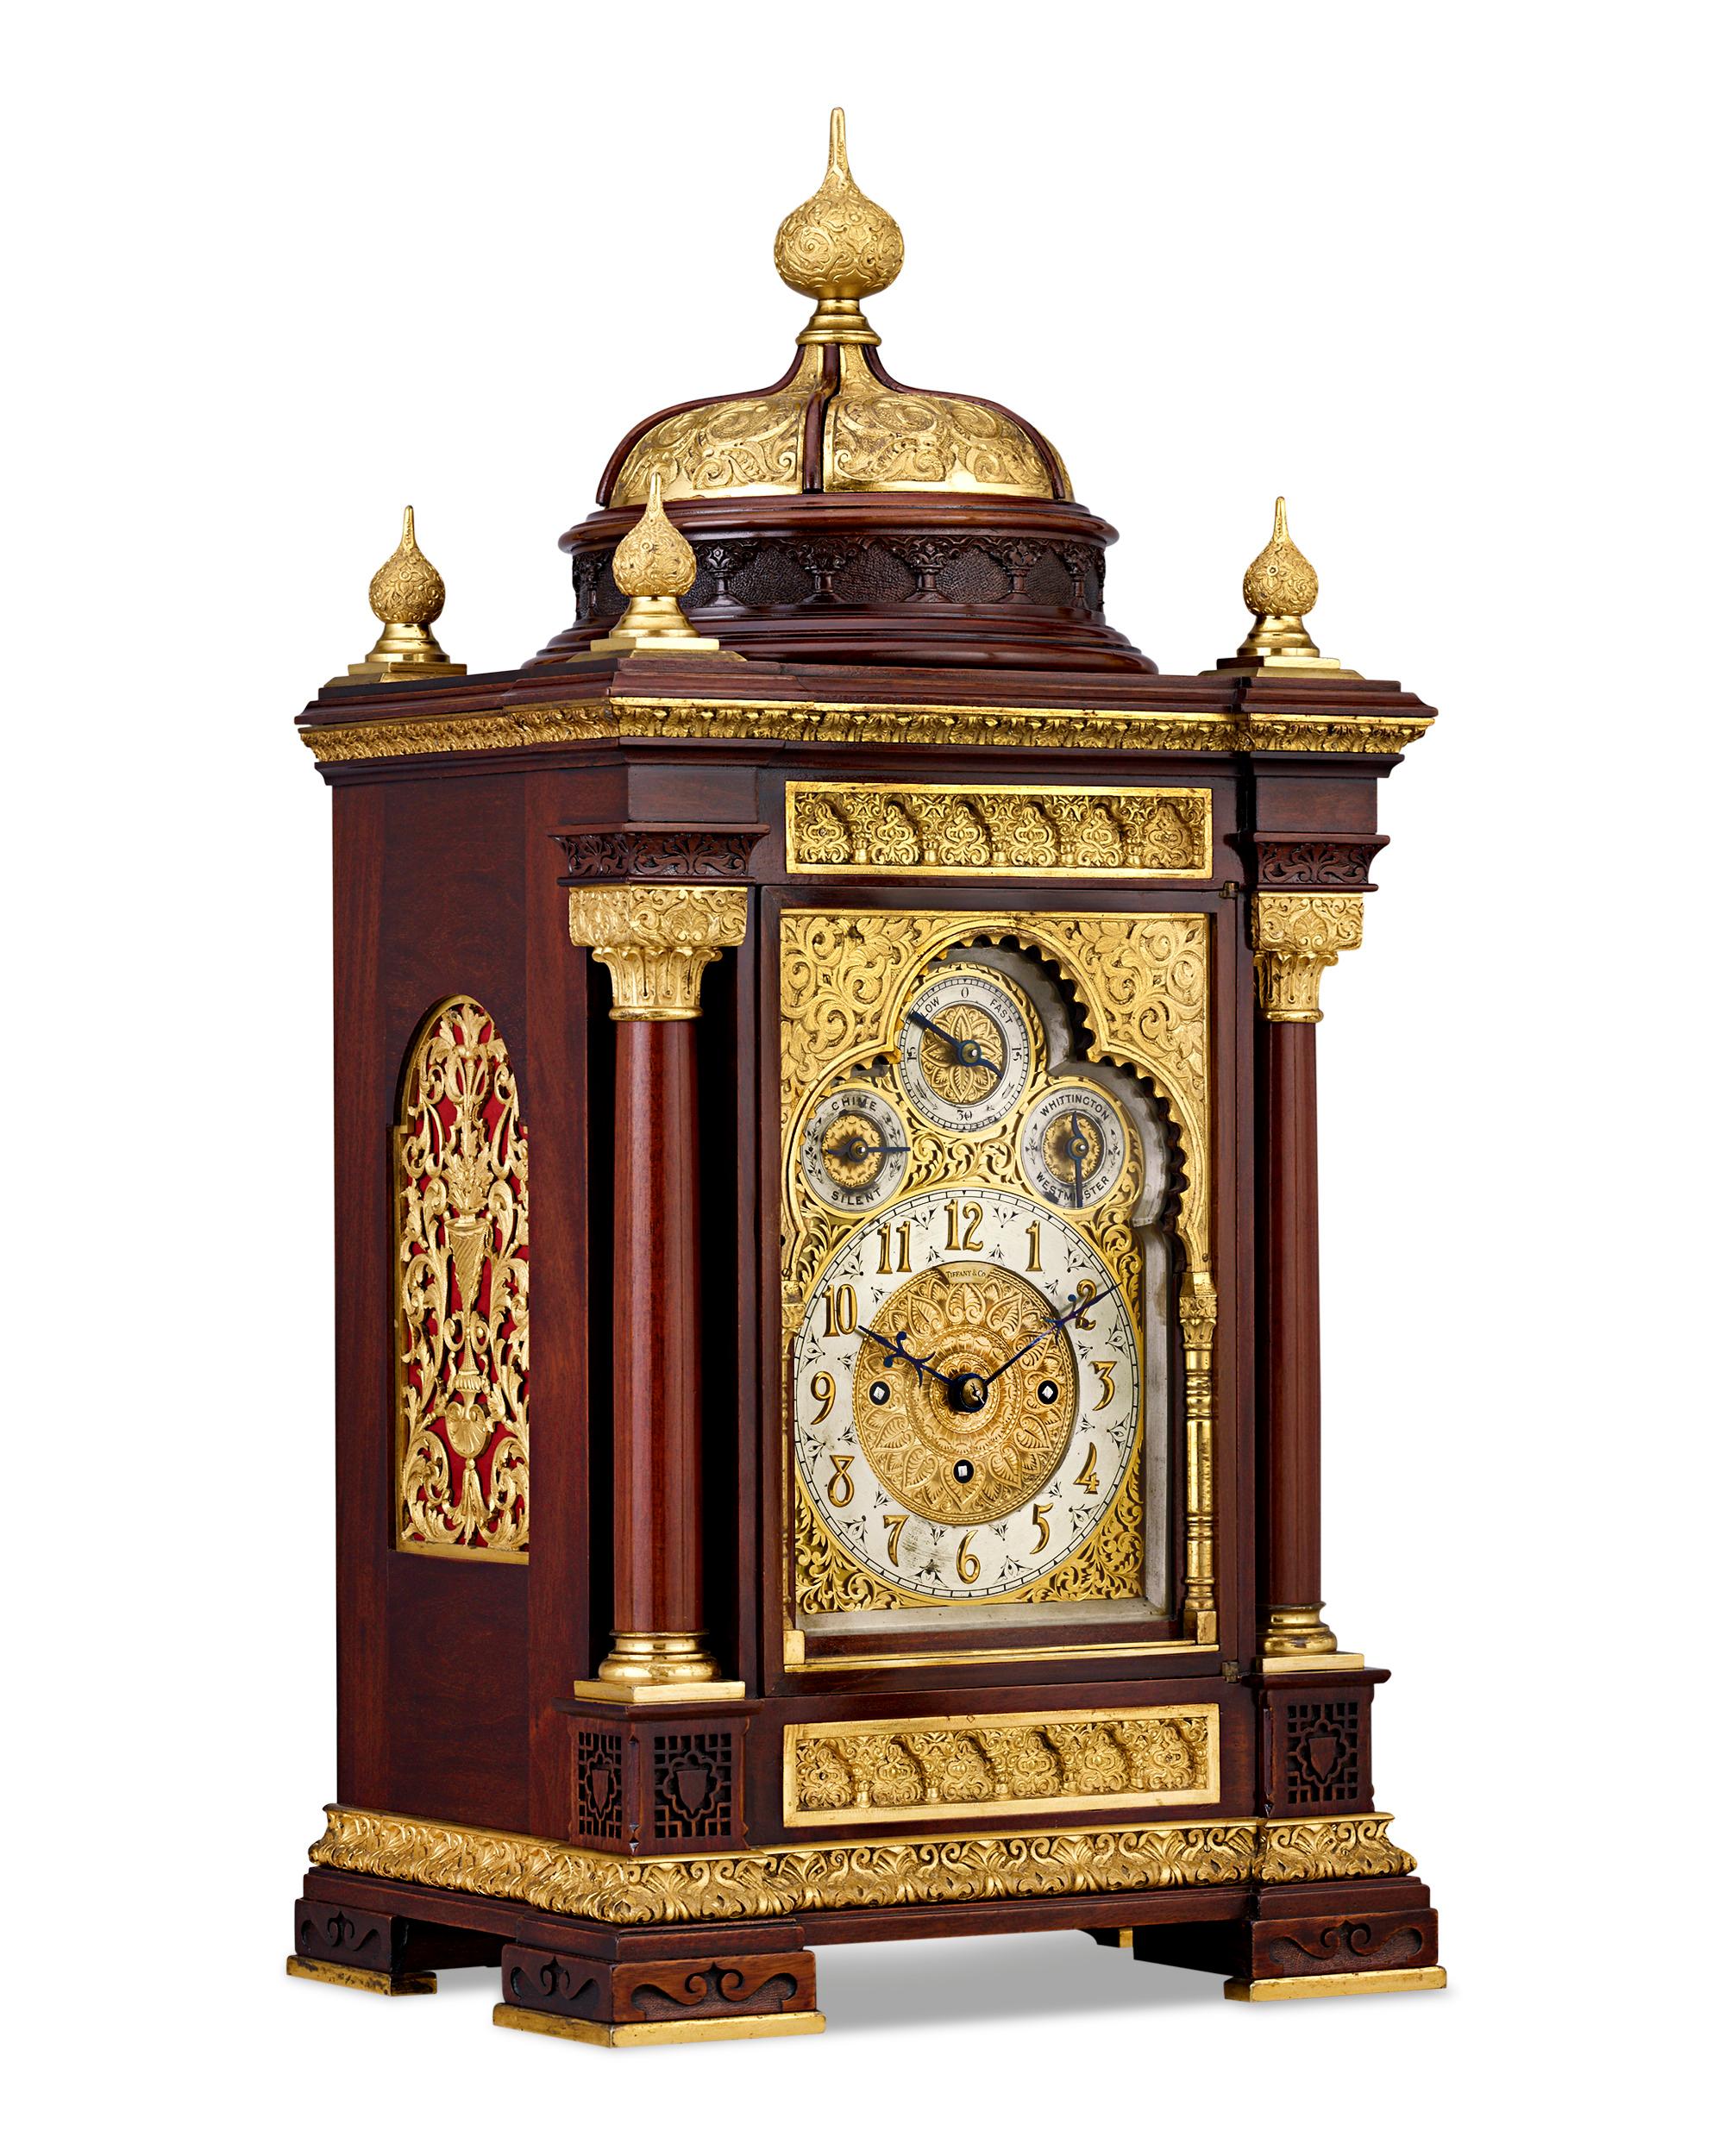 An incredible example of American clockmaking, this Tiffany & Co. mahogany and gilt bronze mantel clock is a shining example of the firm's outstanding artistry in decorative metalwork. The timepiece is embellished with chased designs in a Moorish